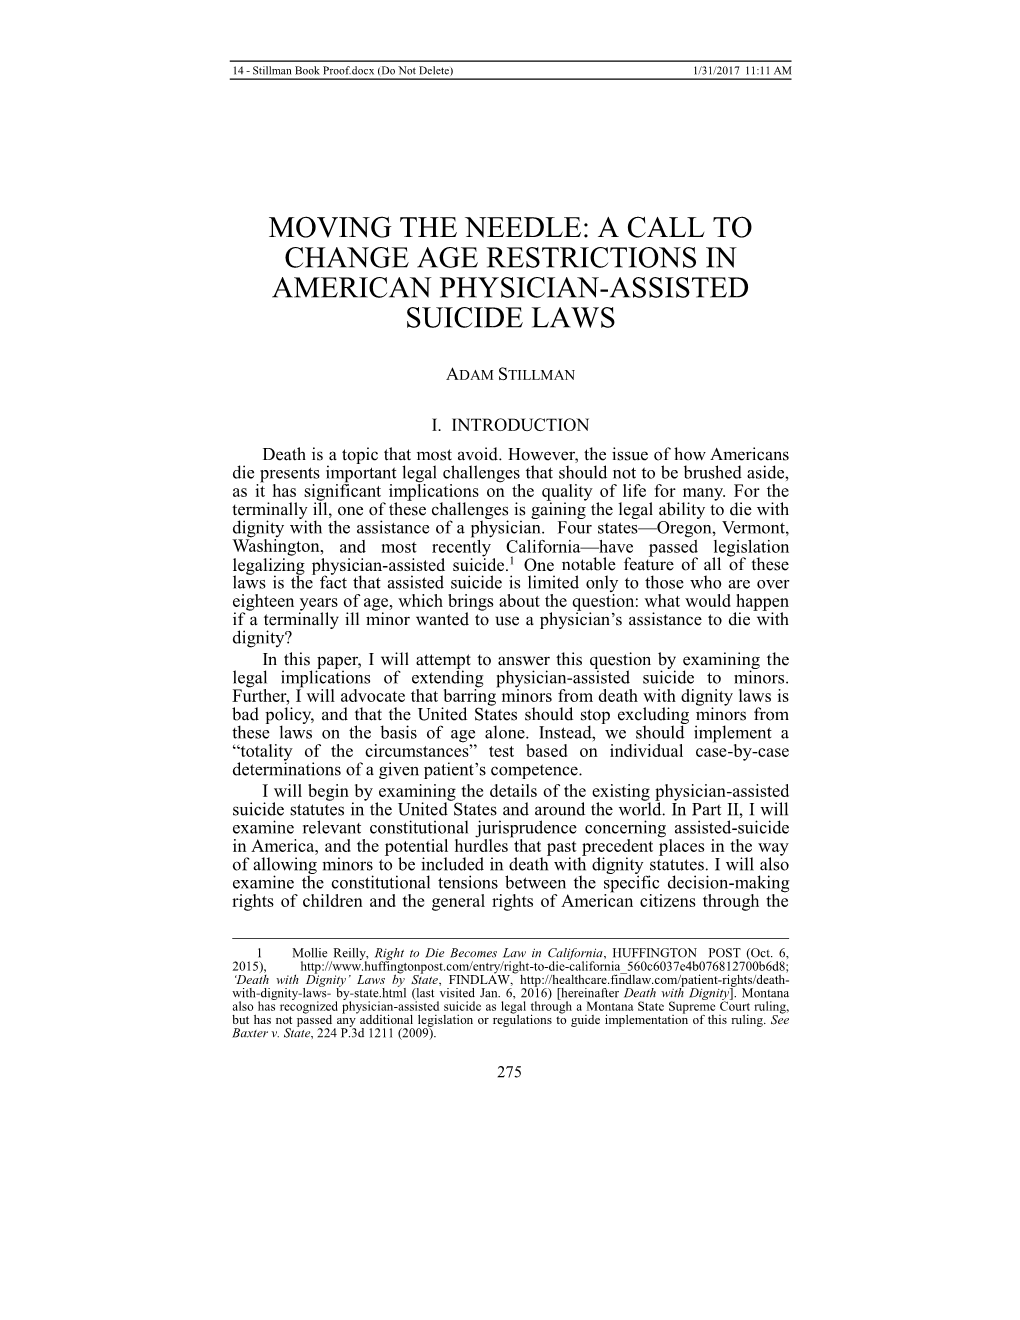 A Call to Change Age Restrictions in American Physician-Assisted Suicide Laws